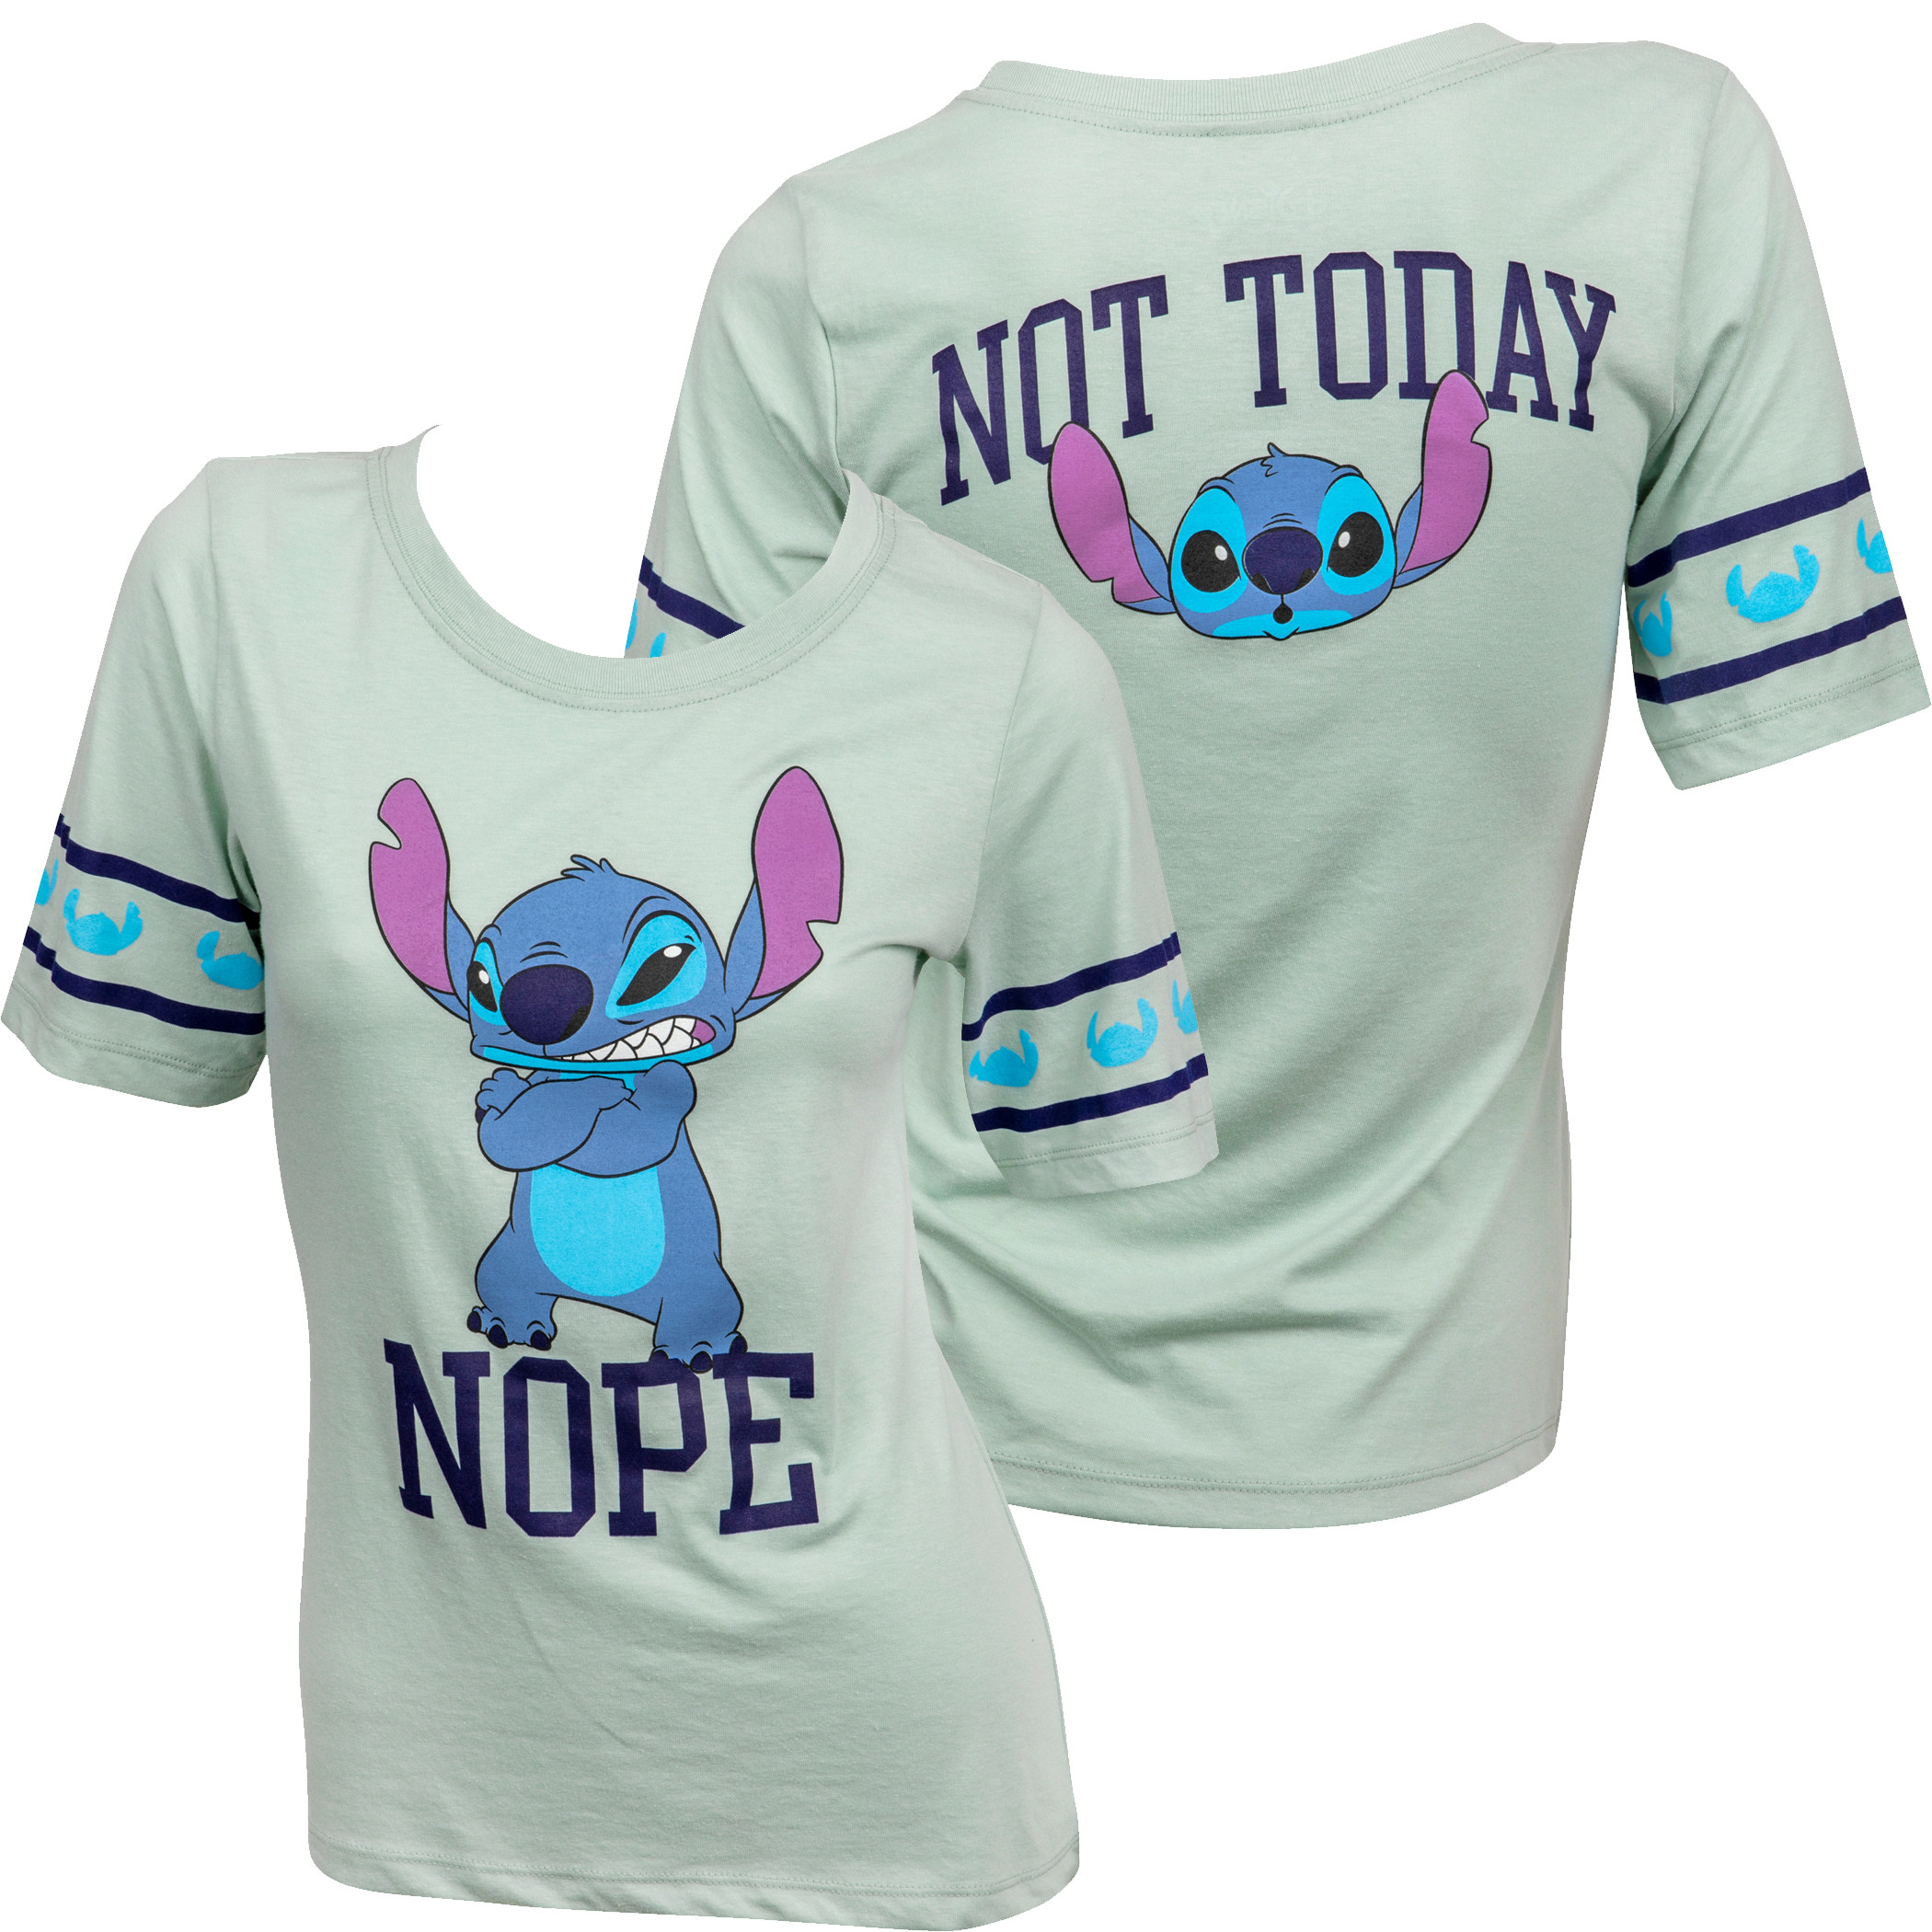 Disney Lilo & Stitch Nope Not Today Front and Back Women's T-Shirt